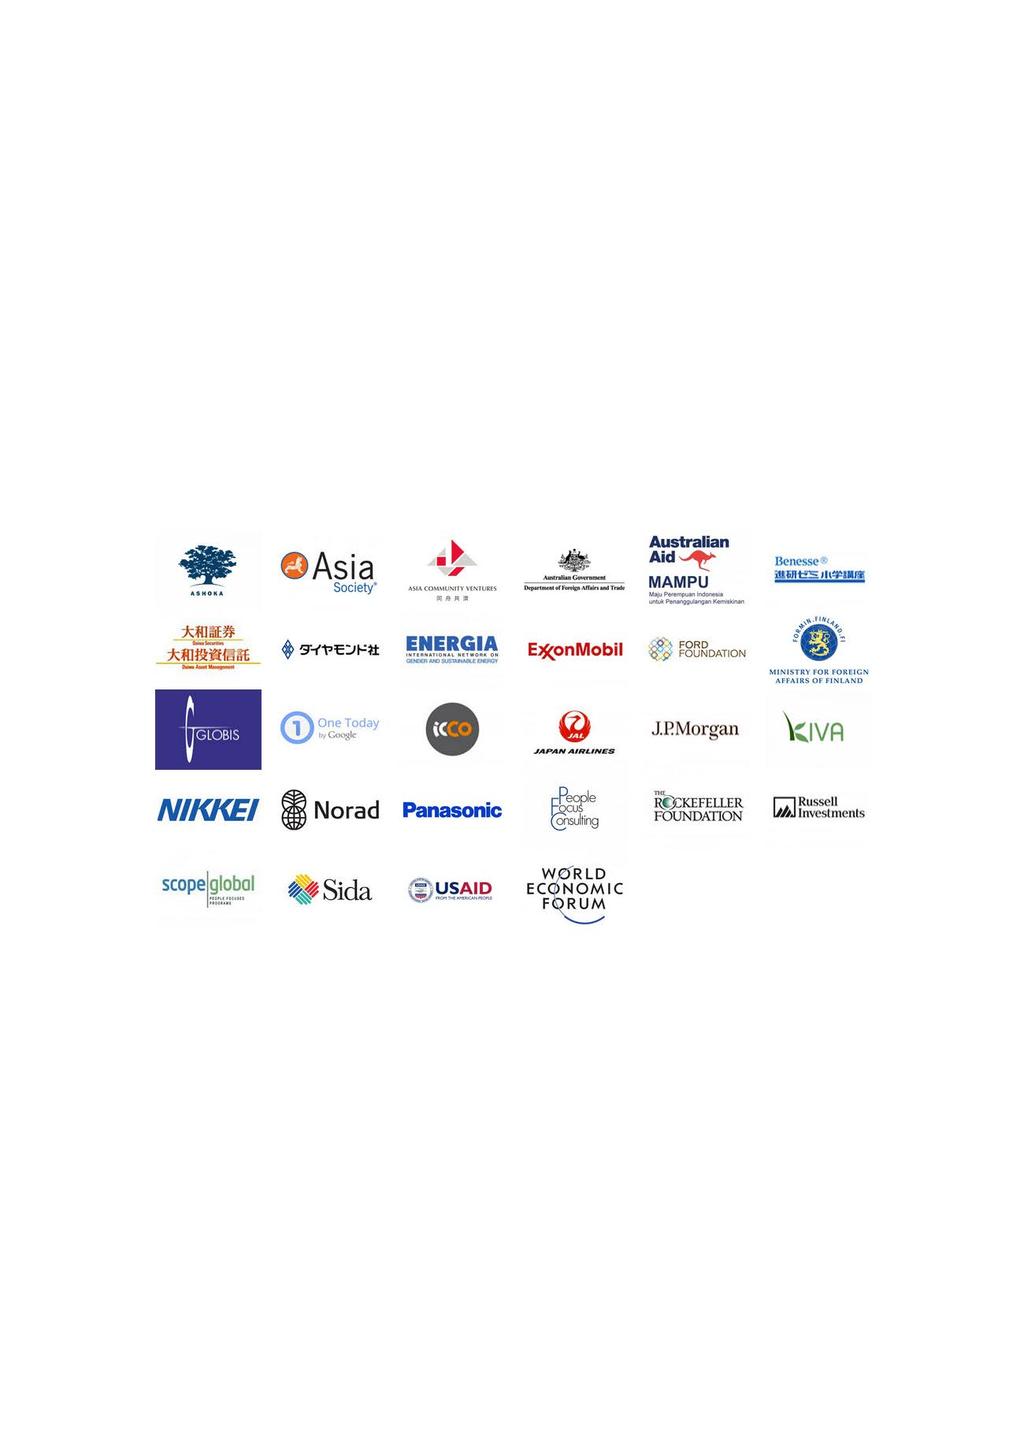 THANK YOU TO OUR MAJOR PARTNERS